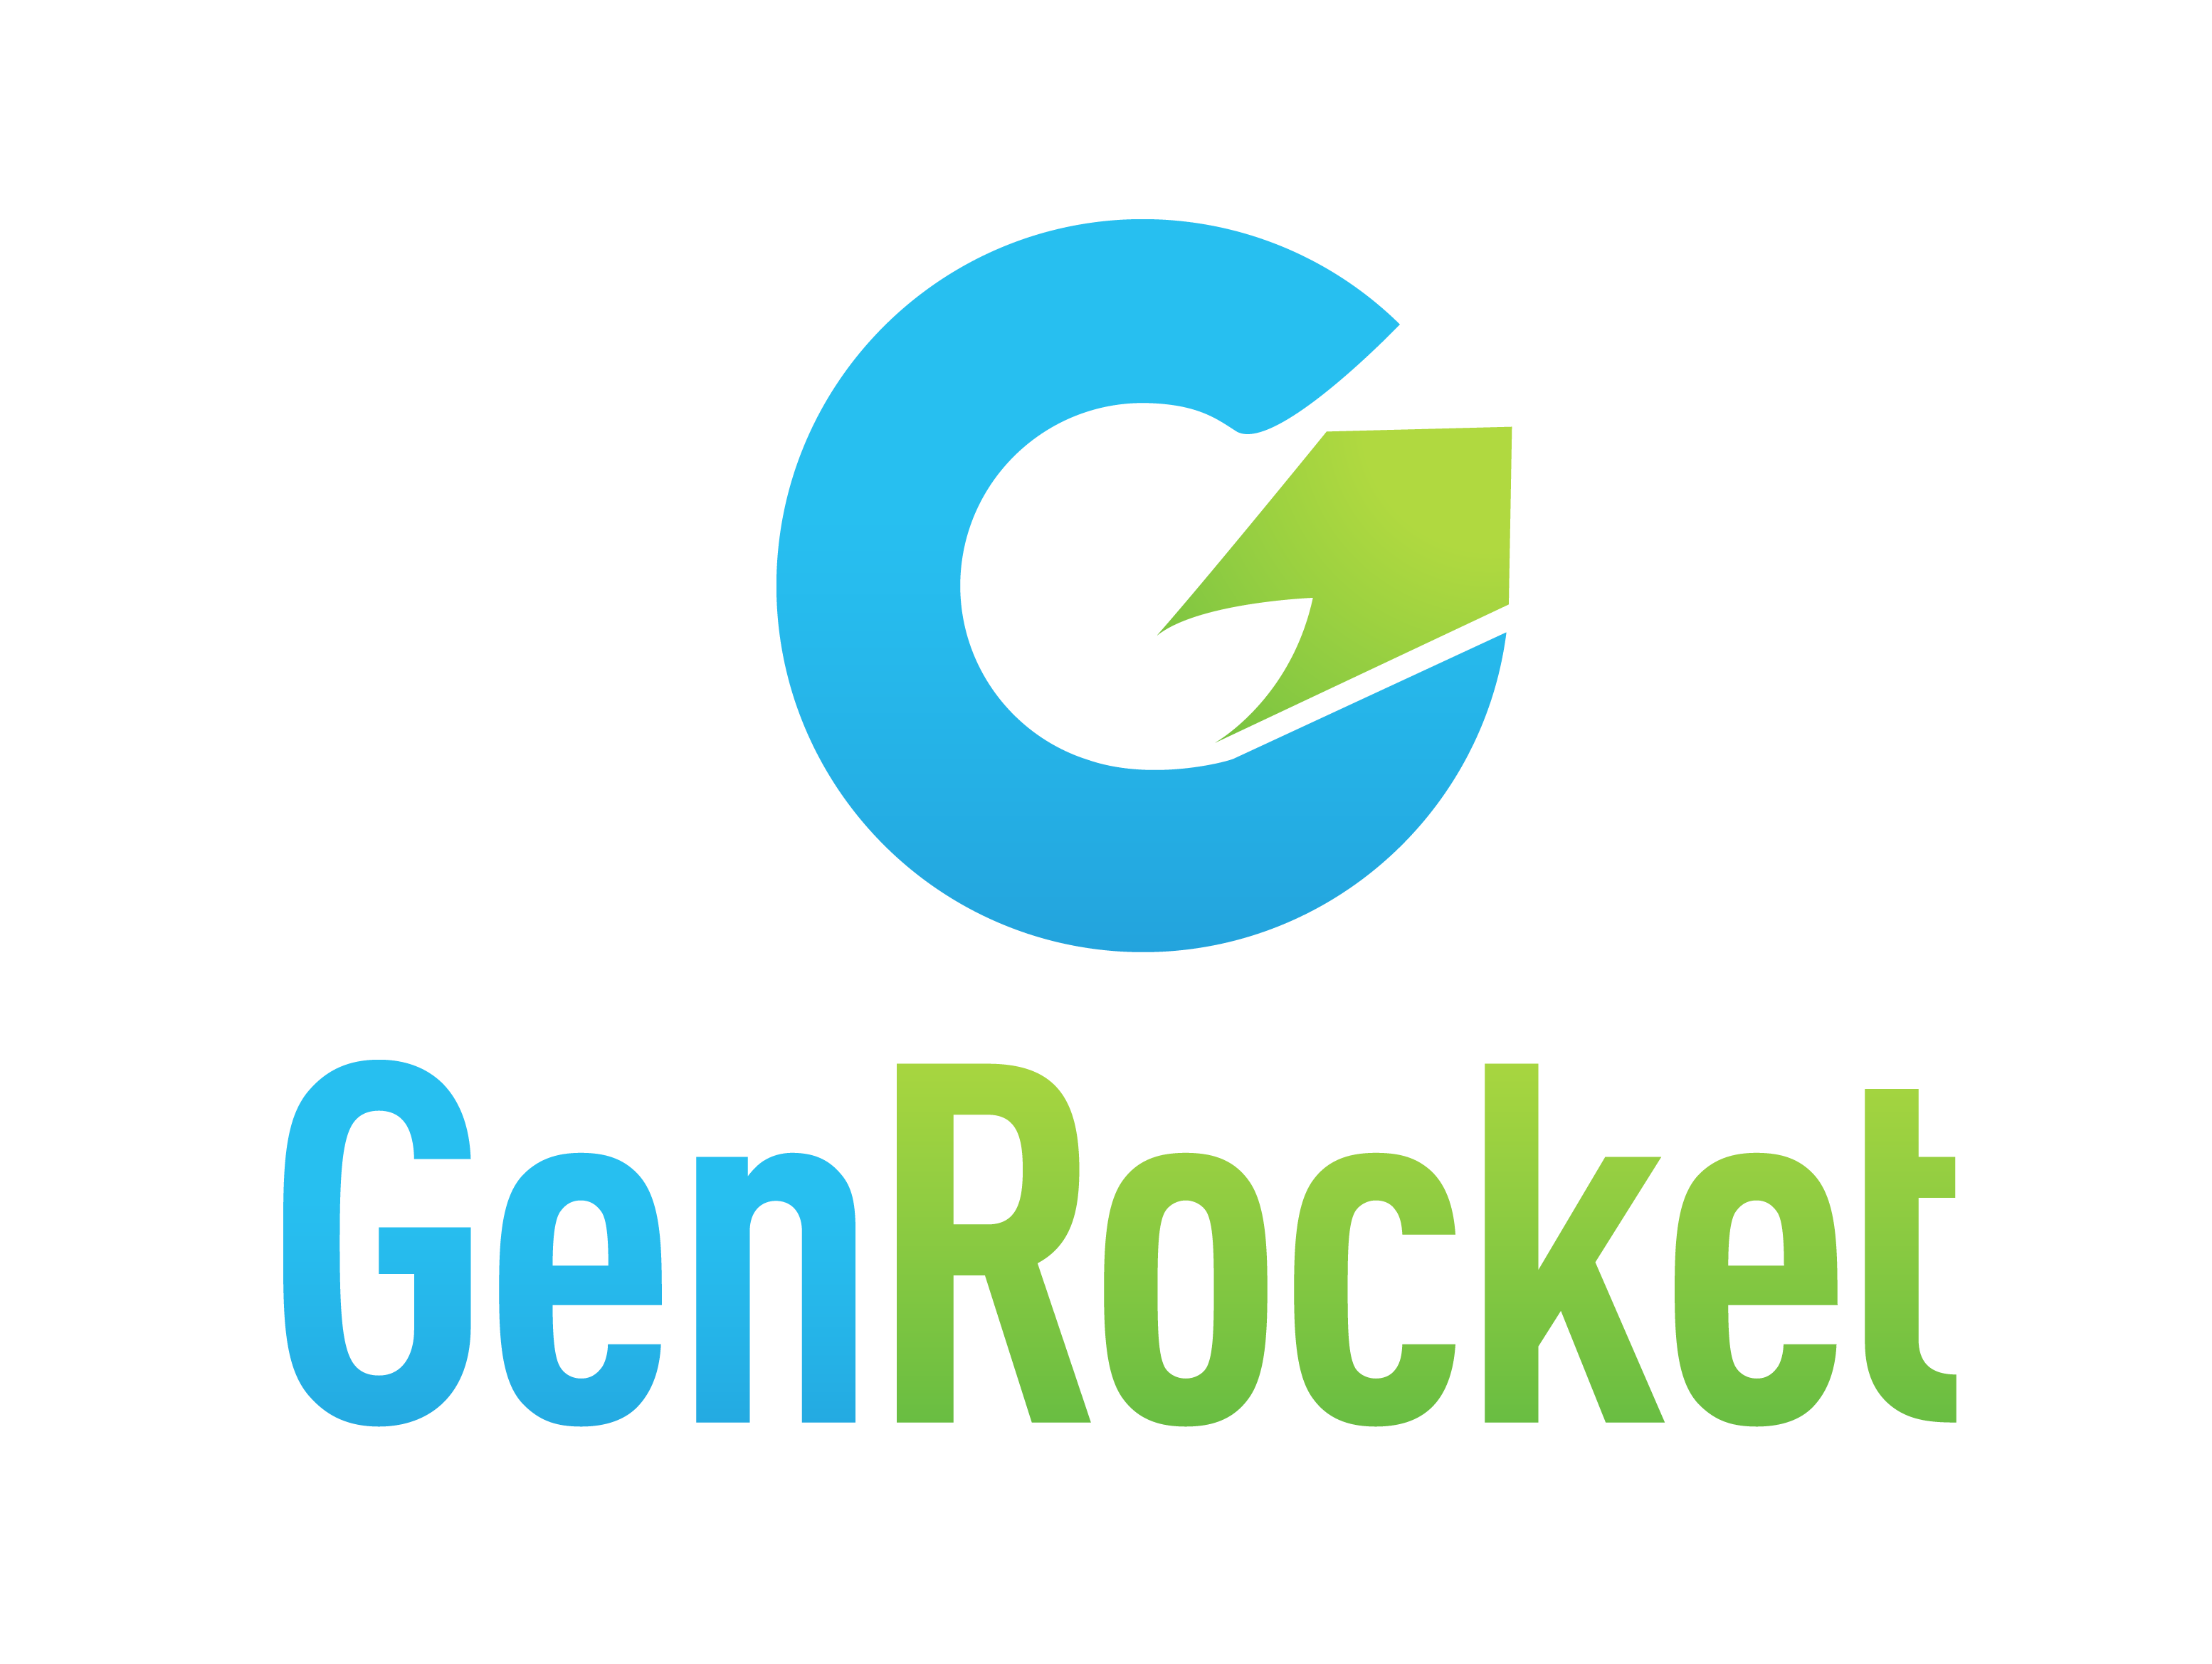 Synthetic Training Data from GenRocket Enables Highly Accurate Machine Learning Models for Anomaly Detection